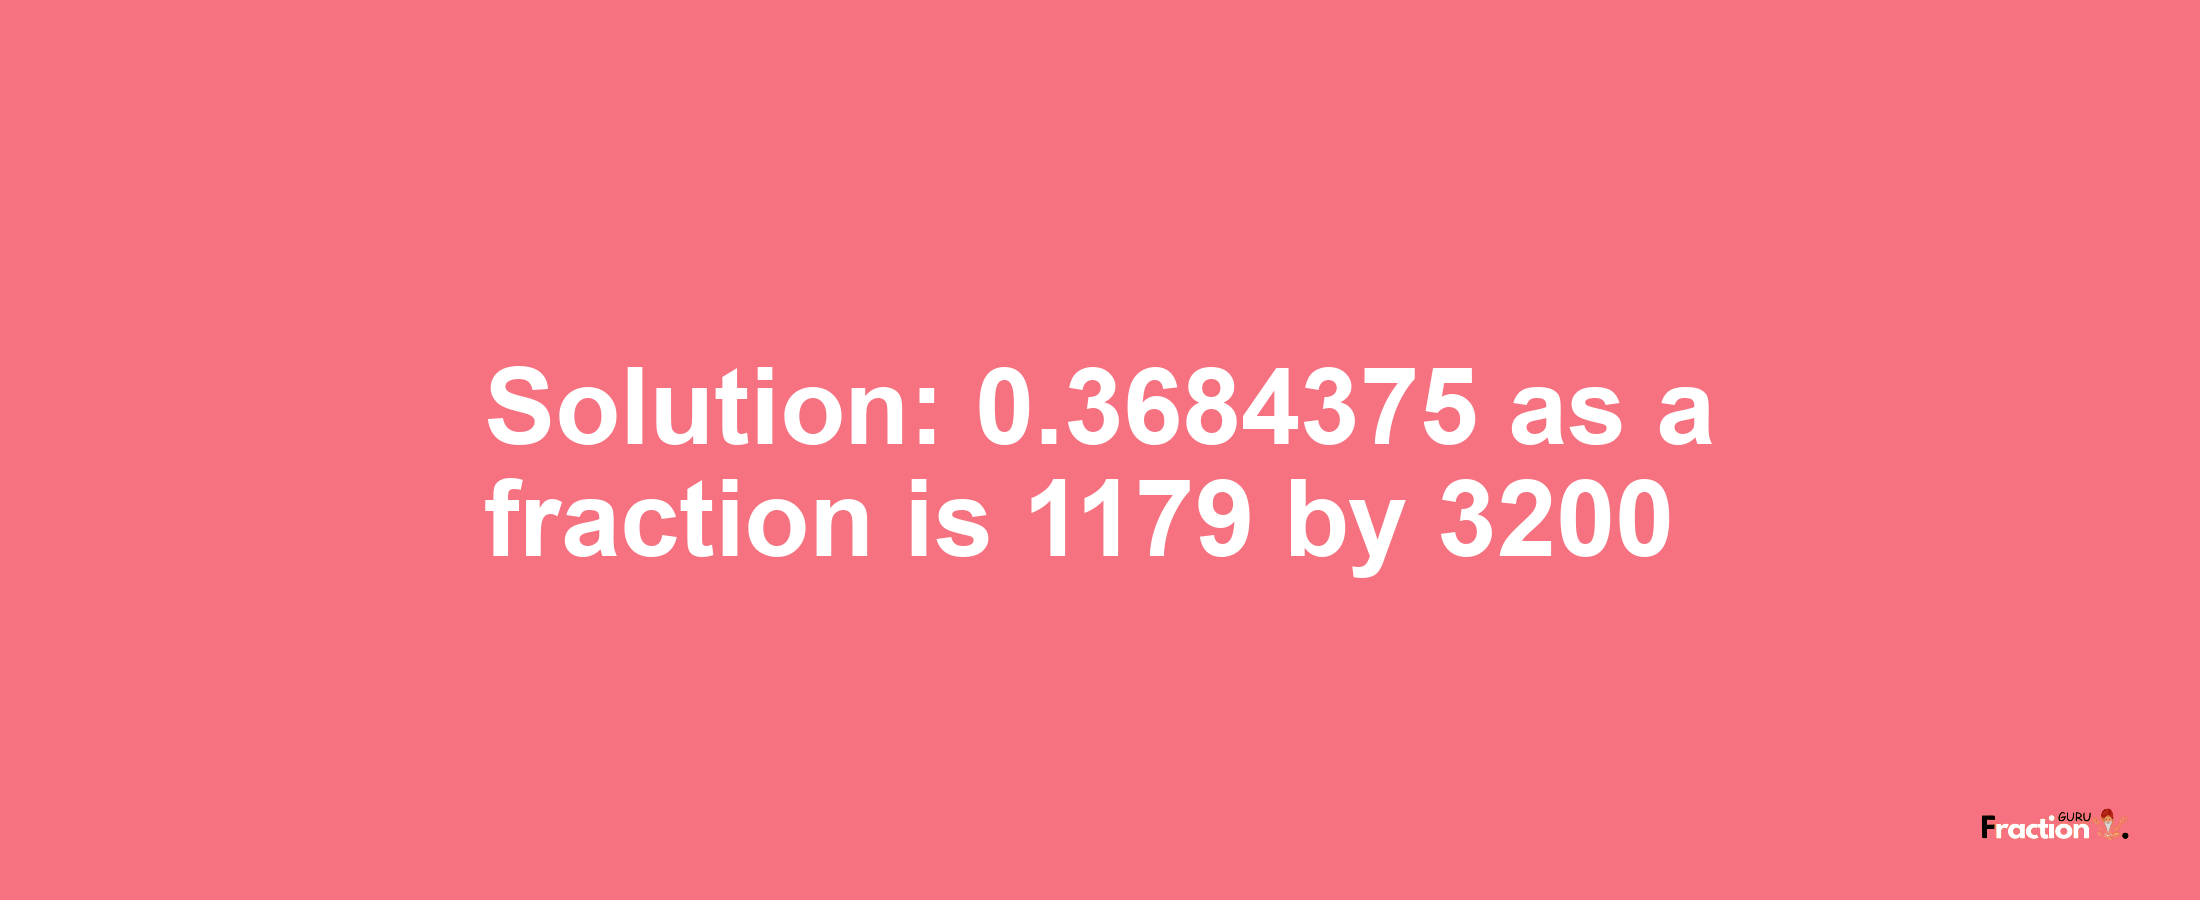 Solution:0.3684375 as a fraction is 1179/3200